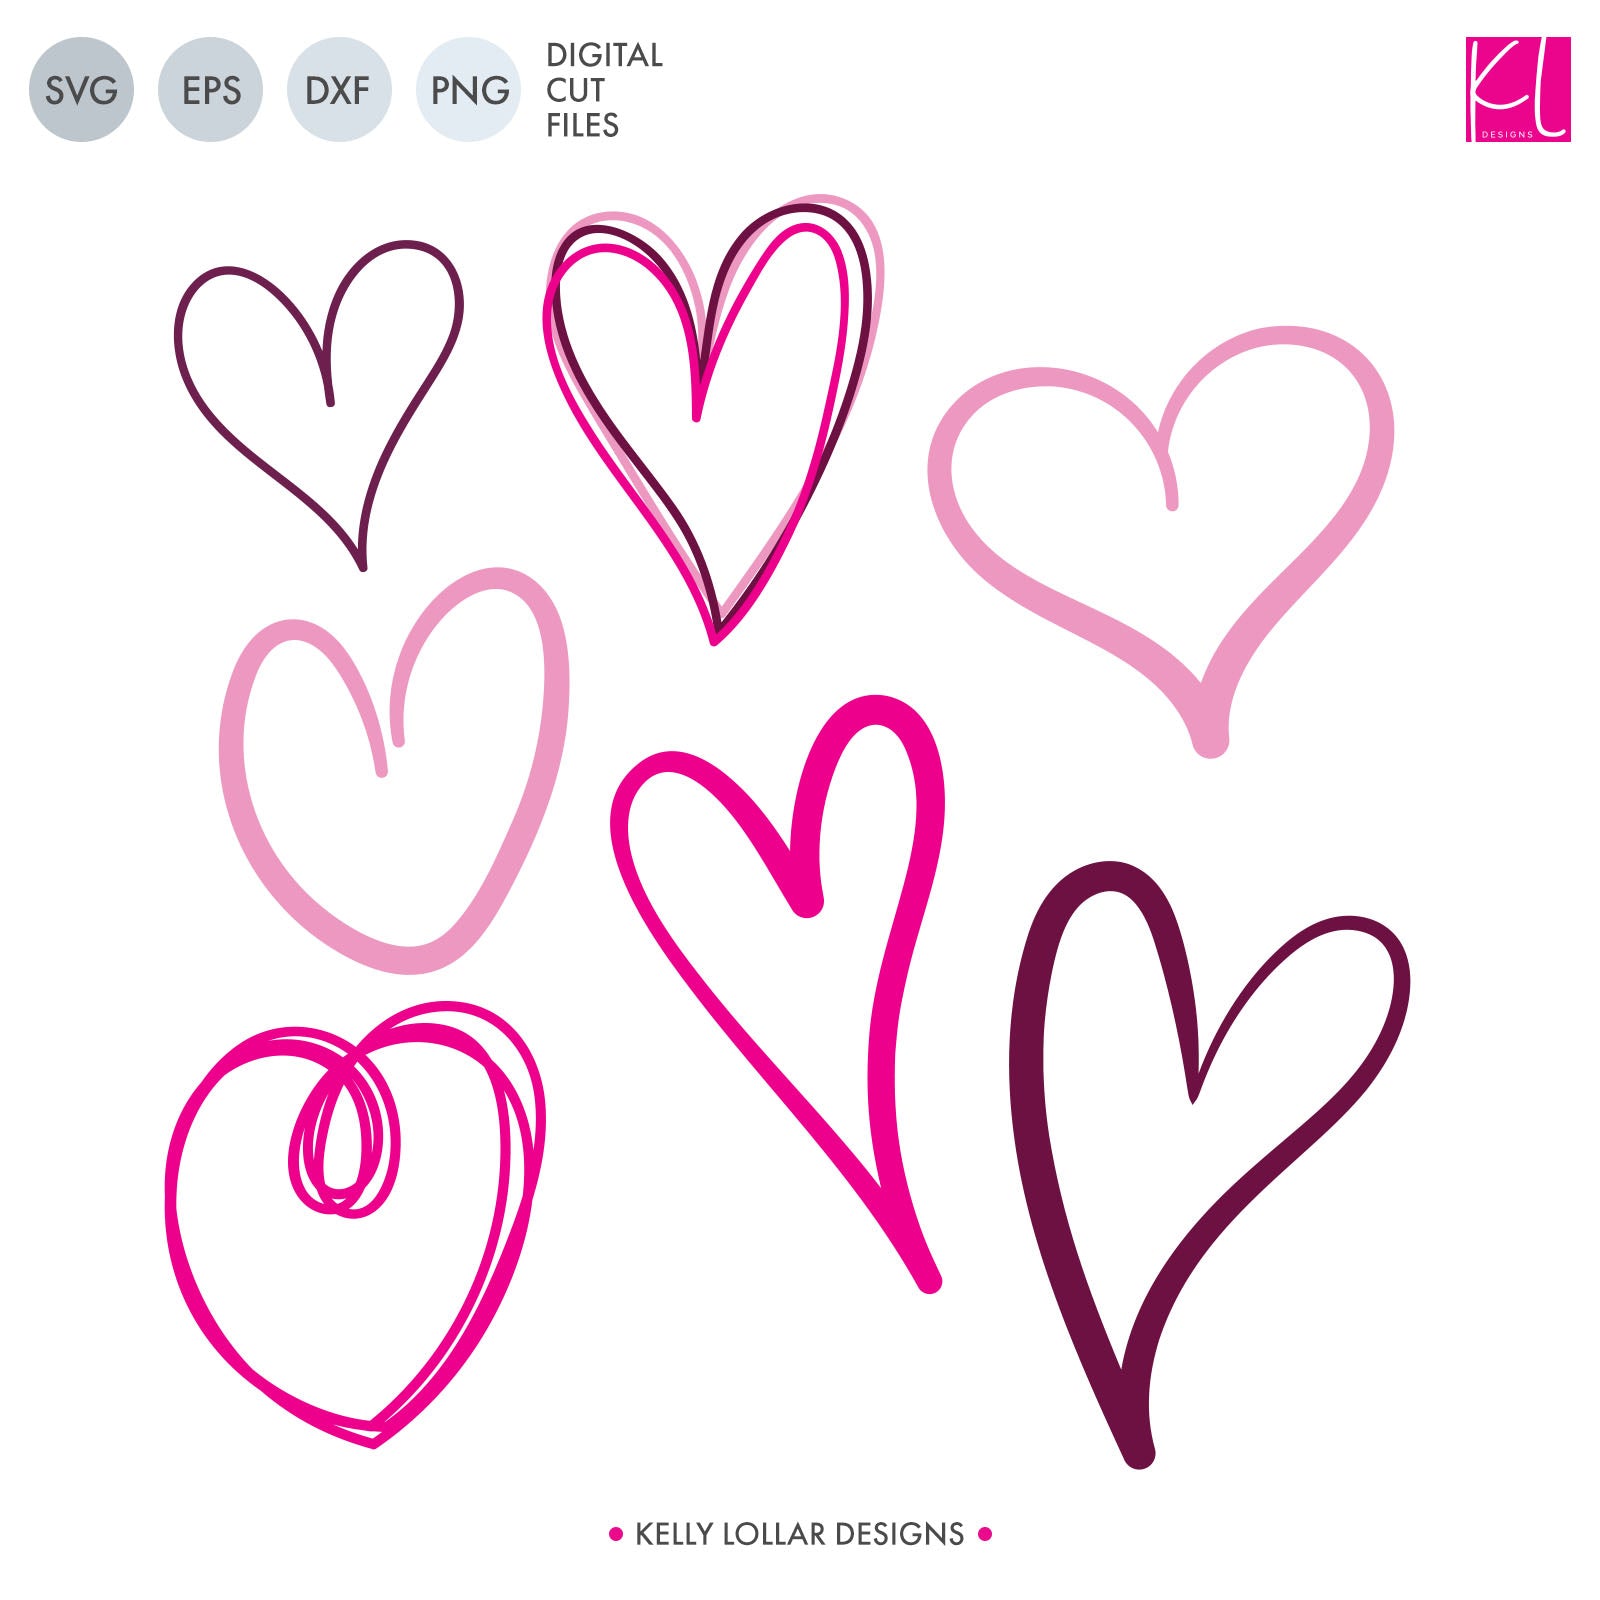 Doodle Hearts Set | SVG DXF EPS PNG Cut Files | Free for Commercial Use